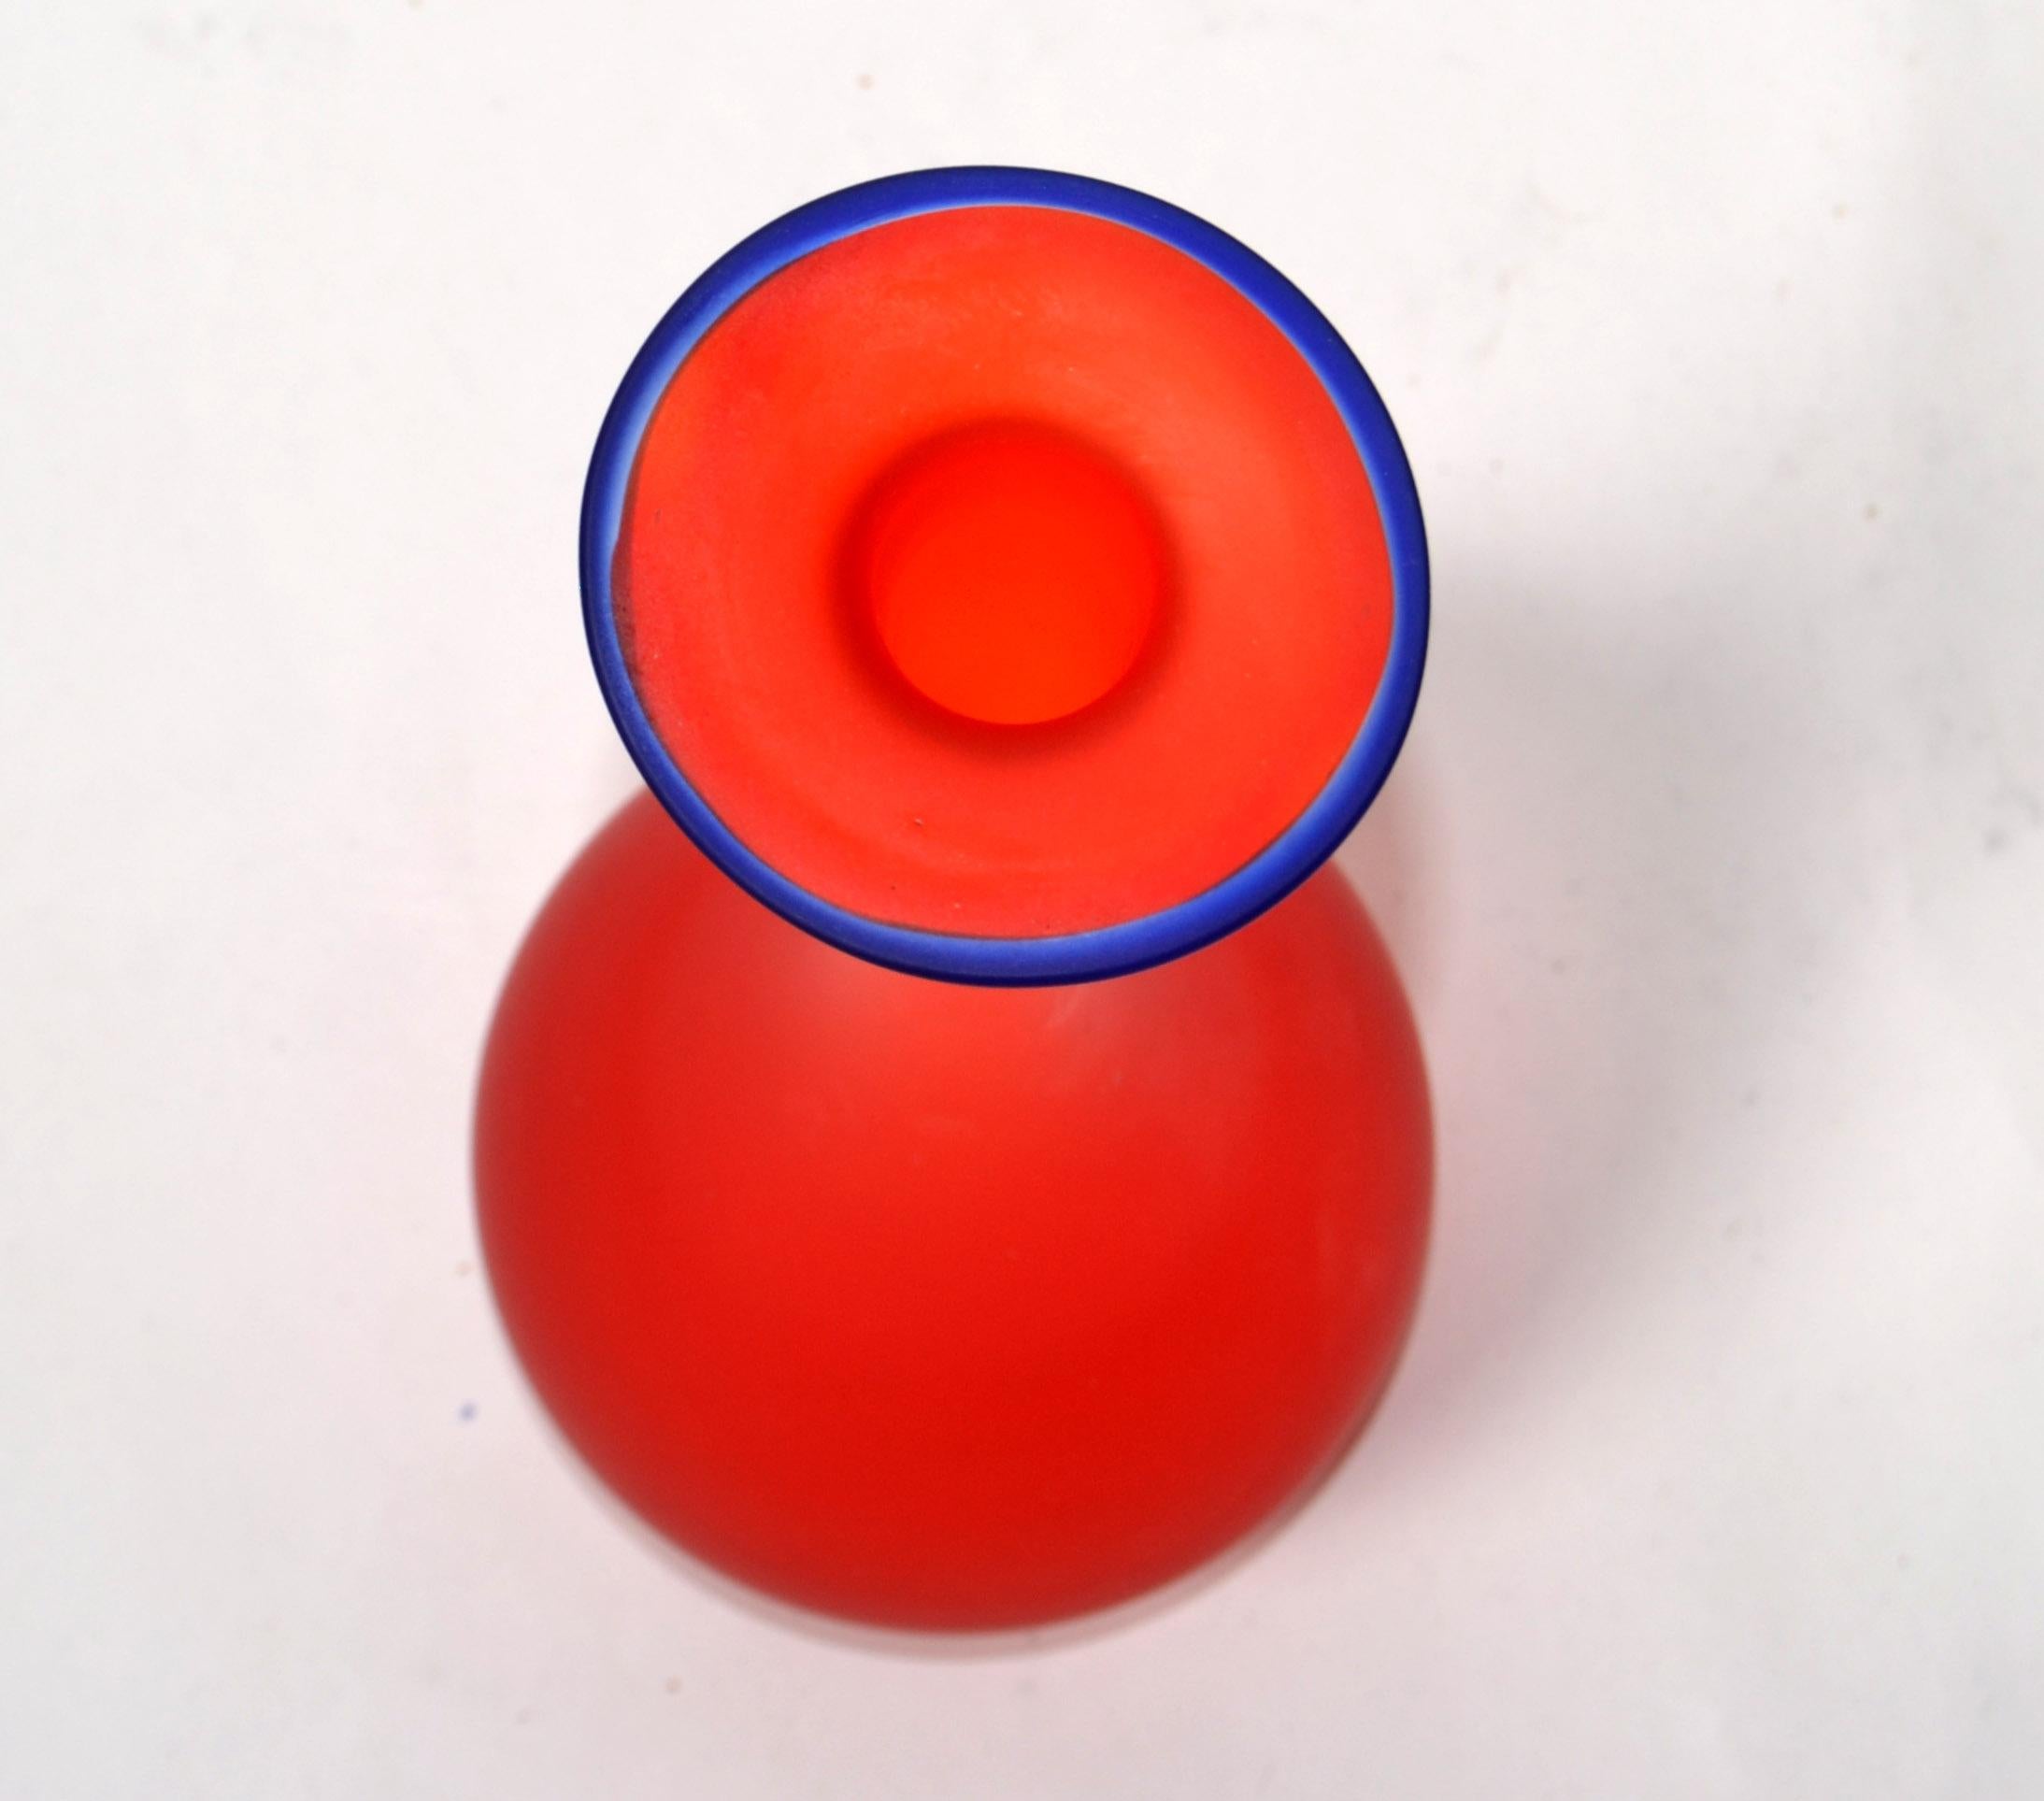 Blown Glass Carlo Moretti Style Translucent Red & Blue Satin Glass Bud Vases, Italy For Sale